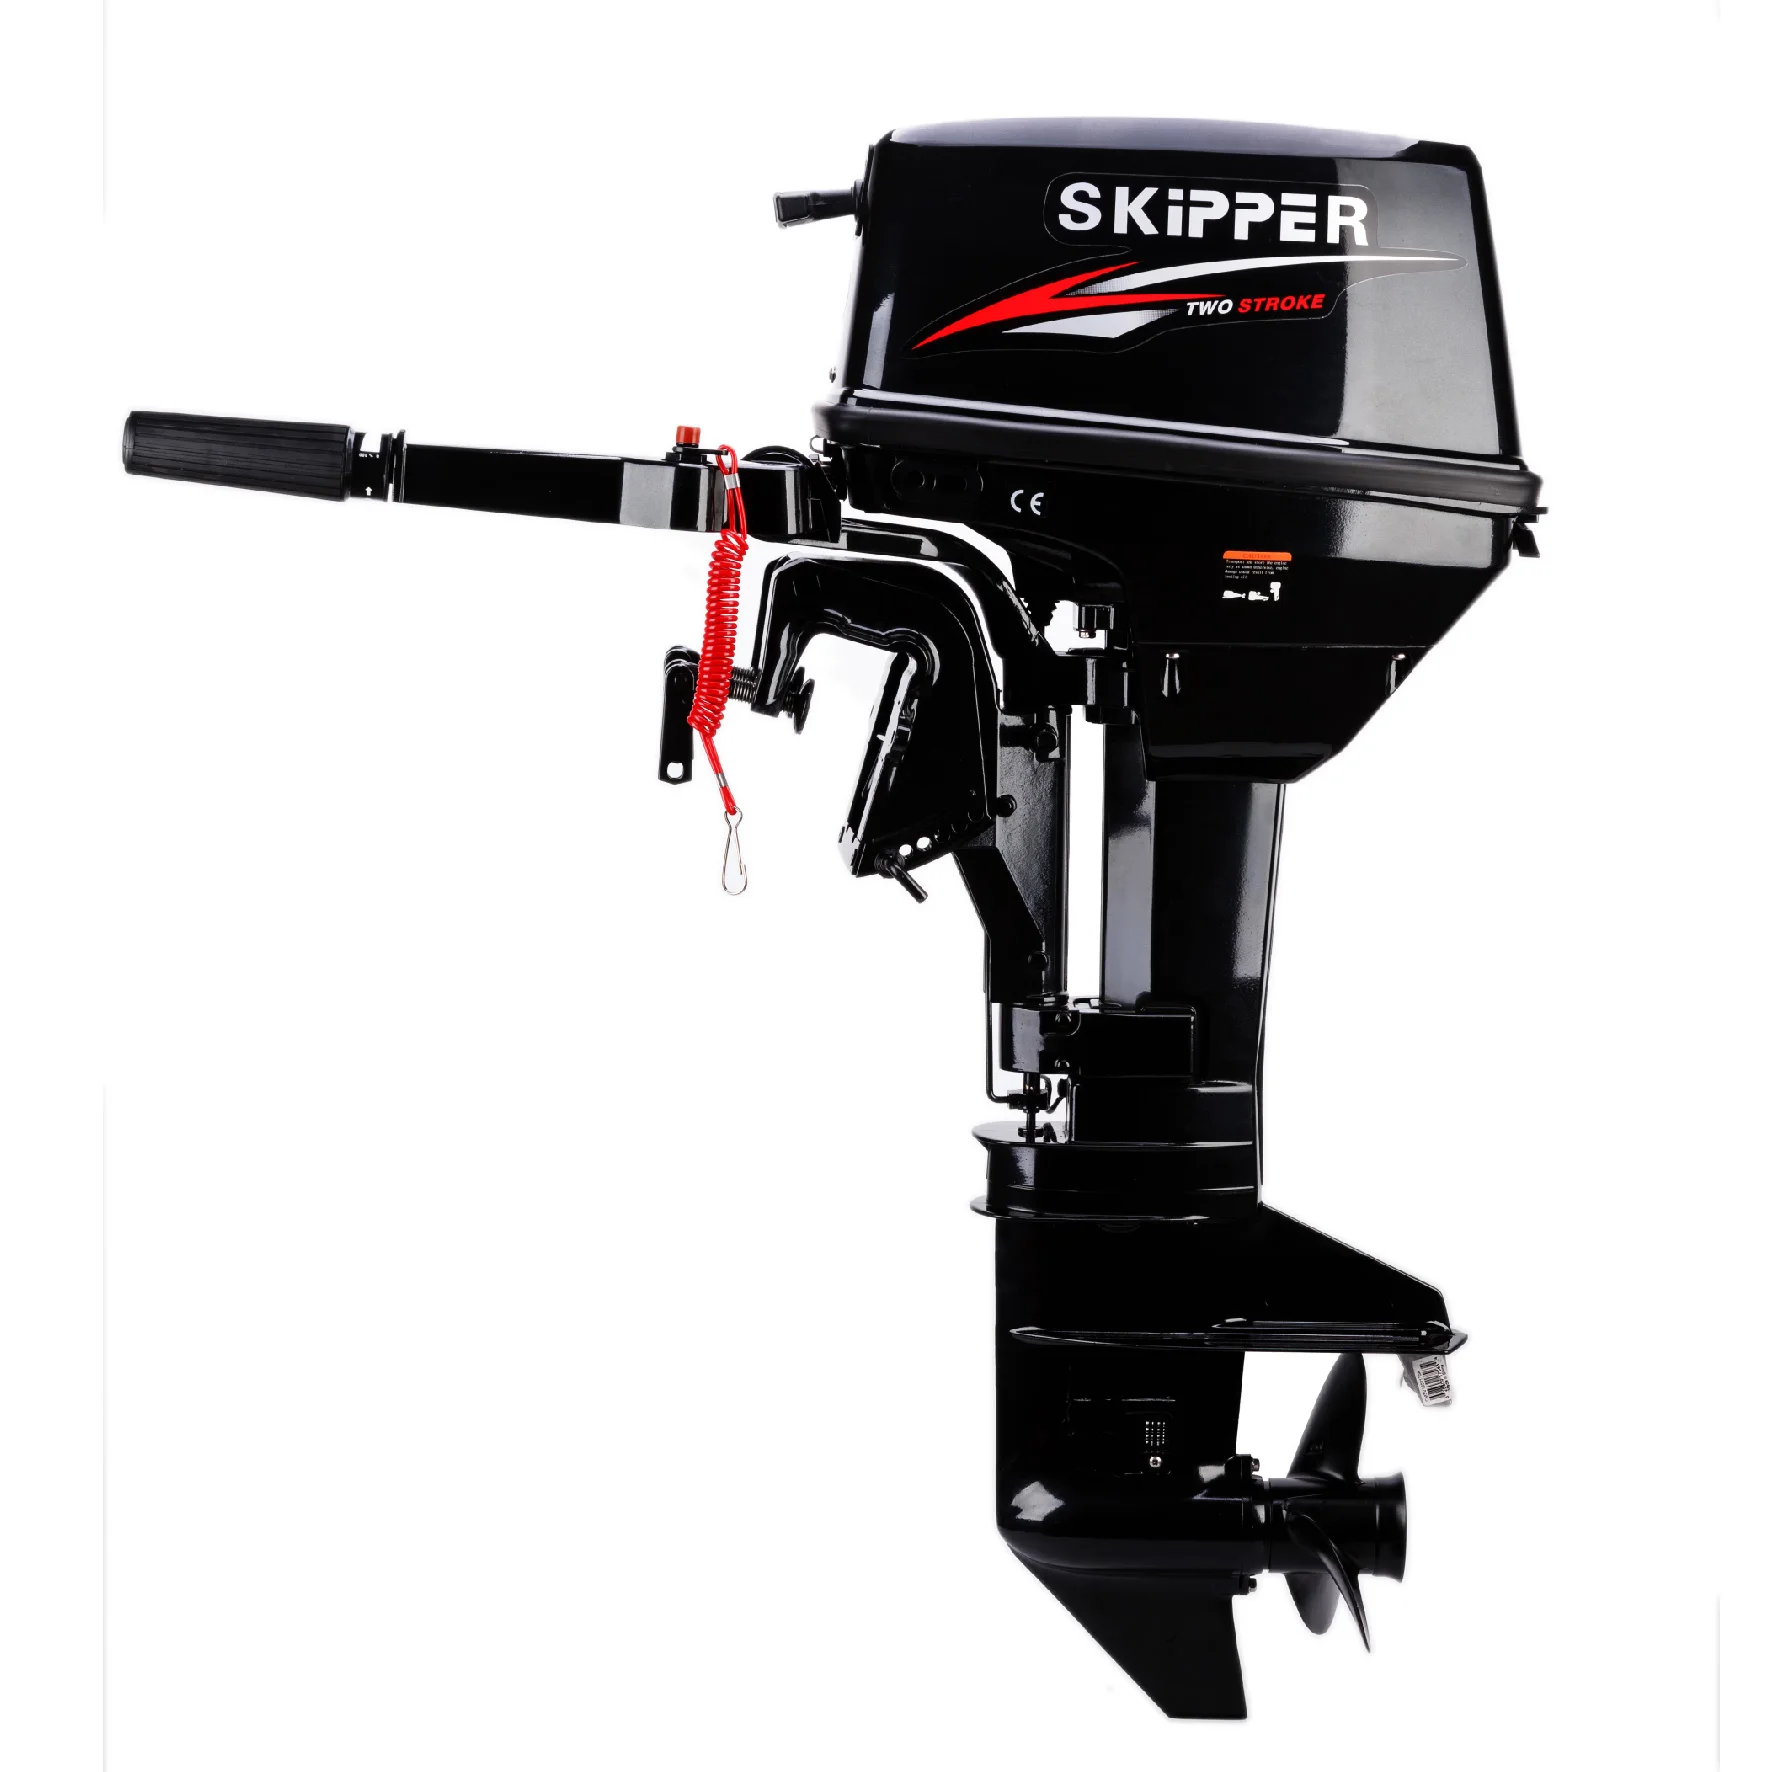 Outboard Motor 9.8hp New 2 Stroke Long Shaft Good Quality Outboard Boat Engine good quality new plc servo motor hg kr13 hg kr053 hg kr053b hg kr13bj hg kr23 hg kr23bj hg kr43b hg kr73bj hg kr73